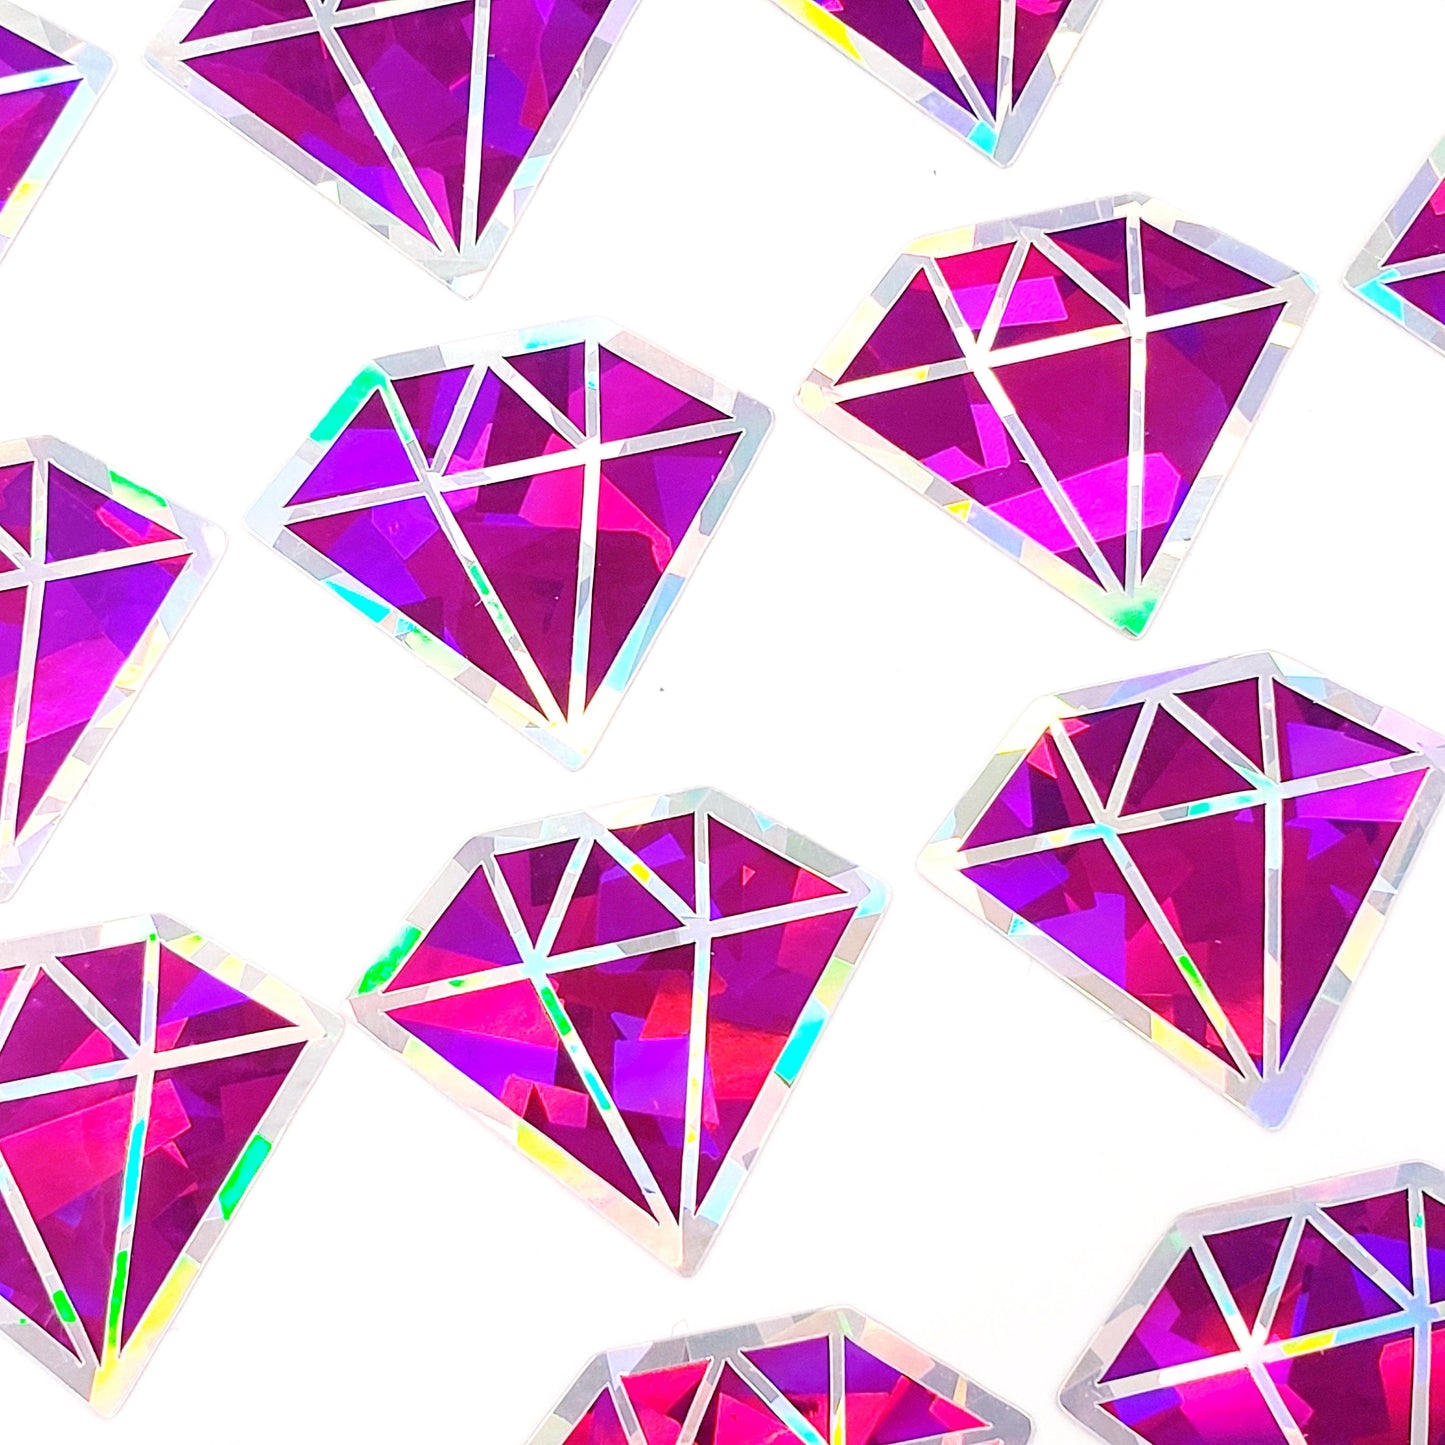 Hot Pink Birthstone stickers, set of 40 small sparkly pink diamond decals for gifts, notes, journals, phone grips and scrapbook pages.